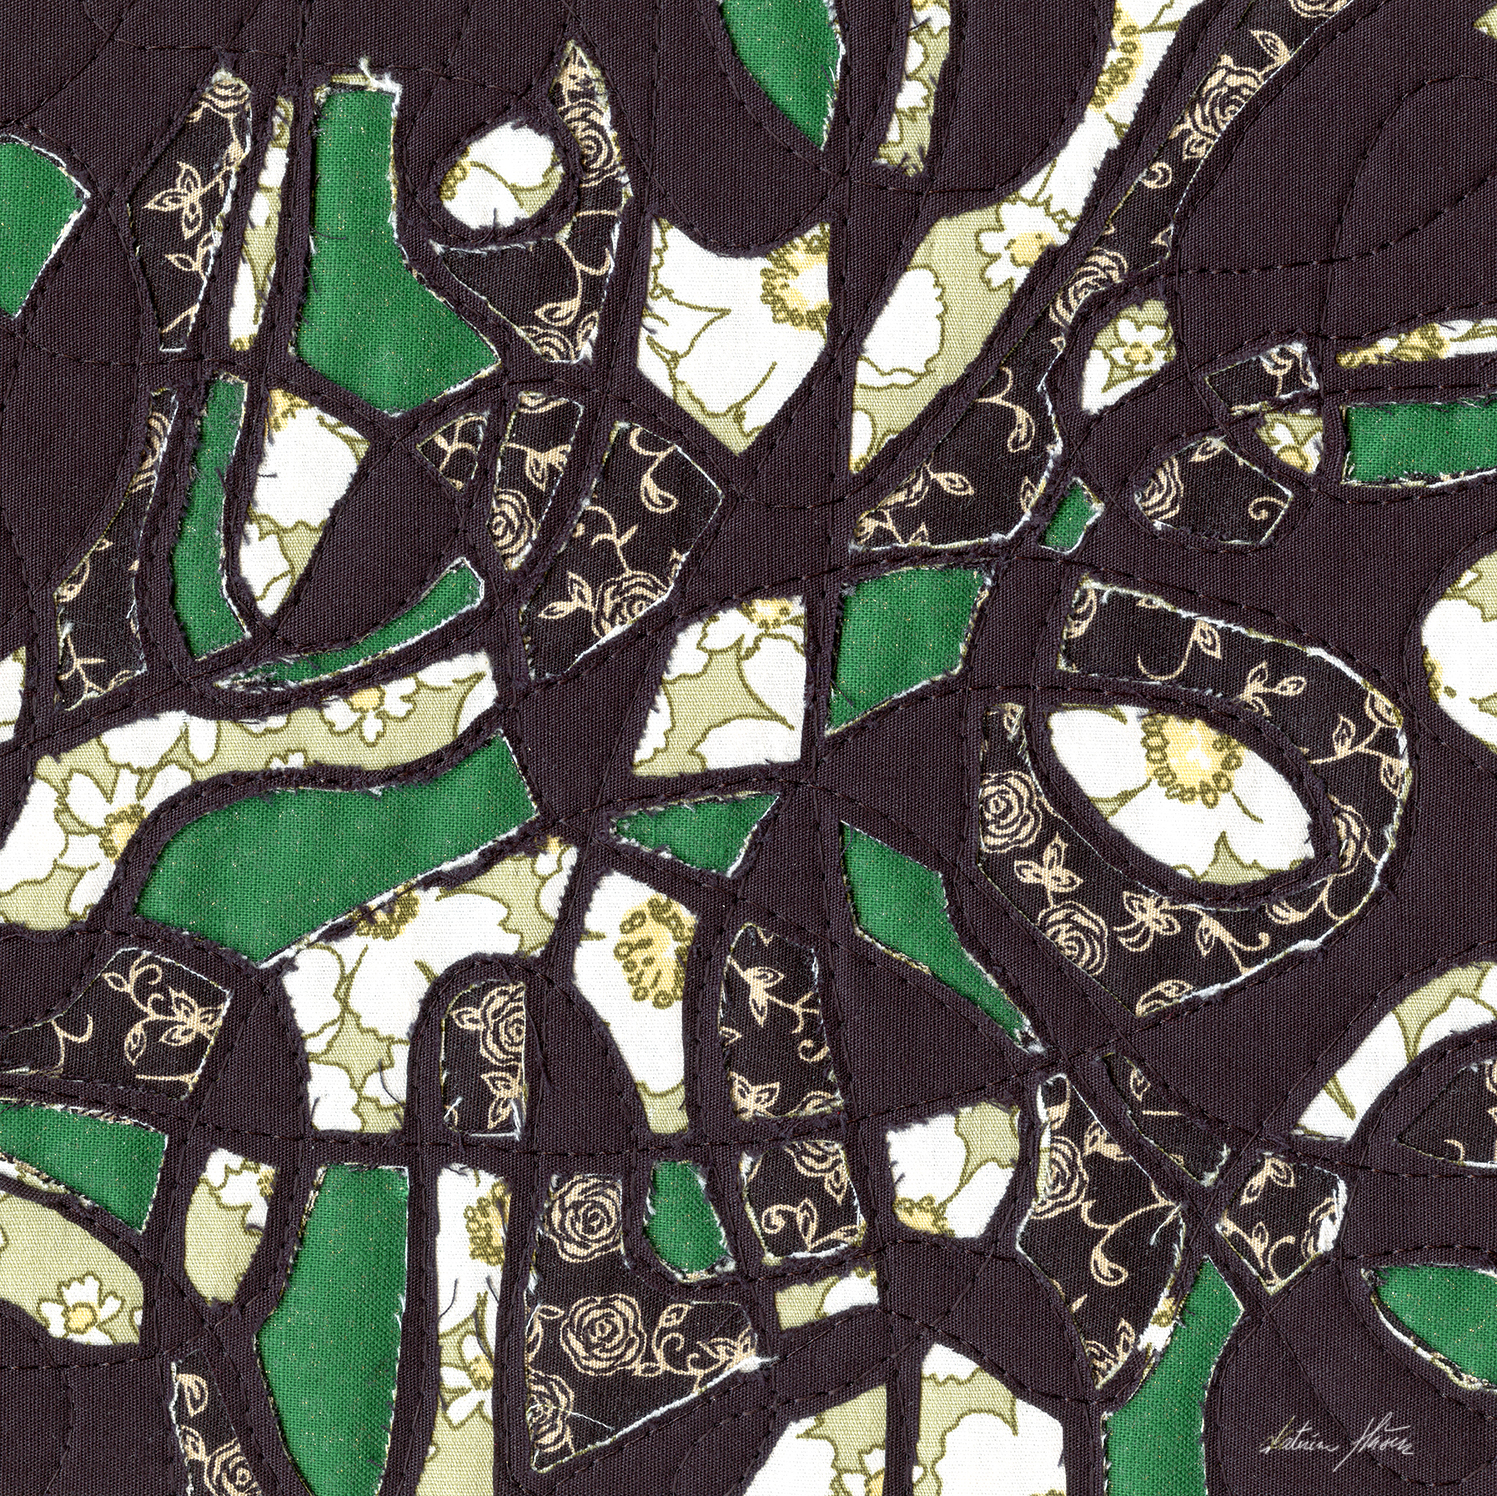 A textile artwork titled Shattered Emerald Dream created by Katerina Hasek.